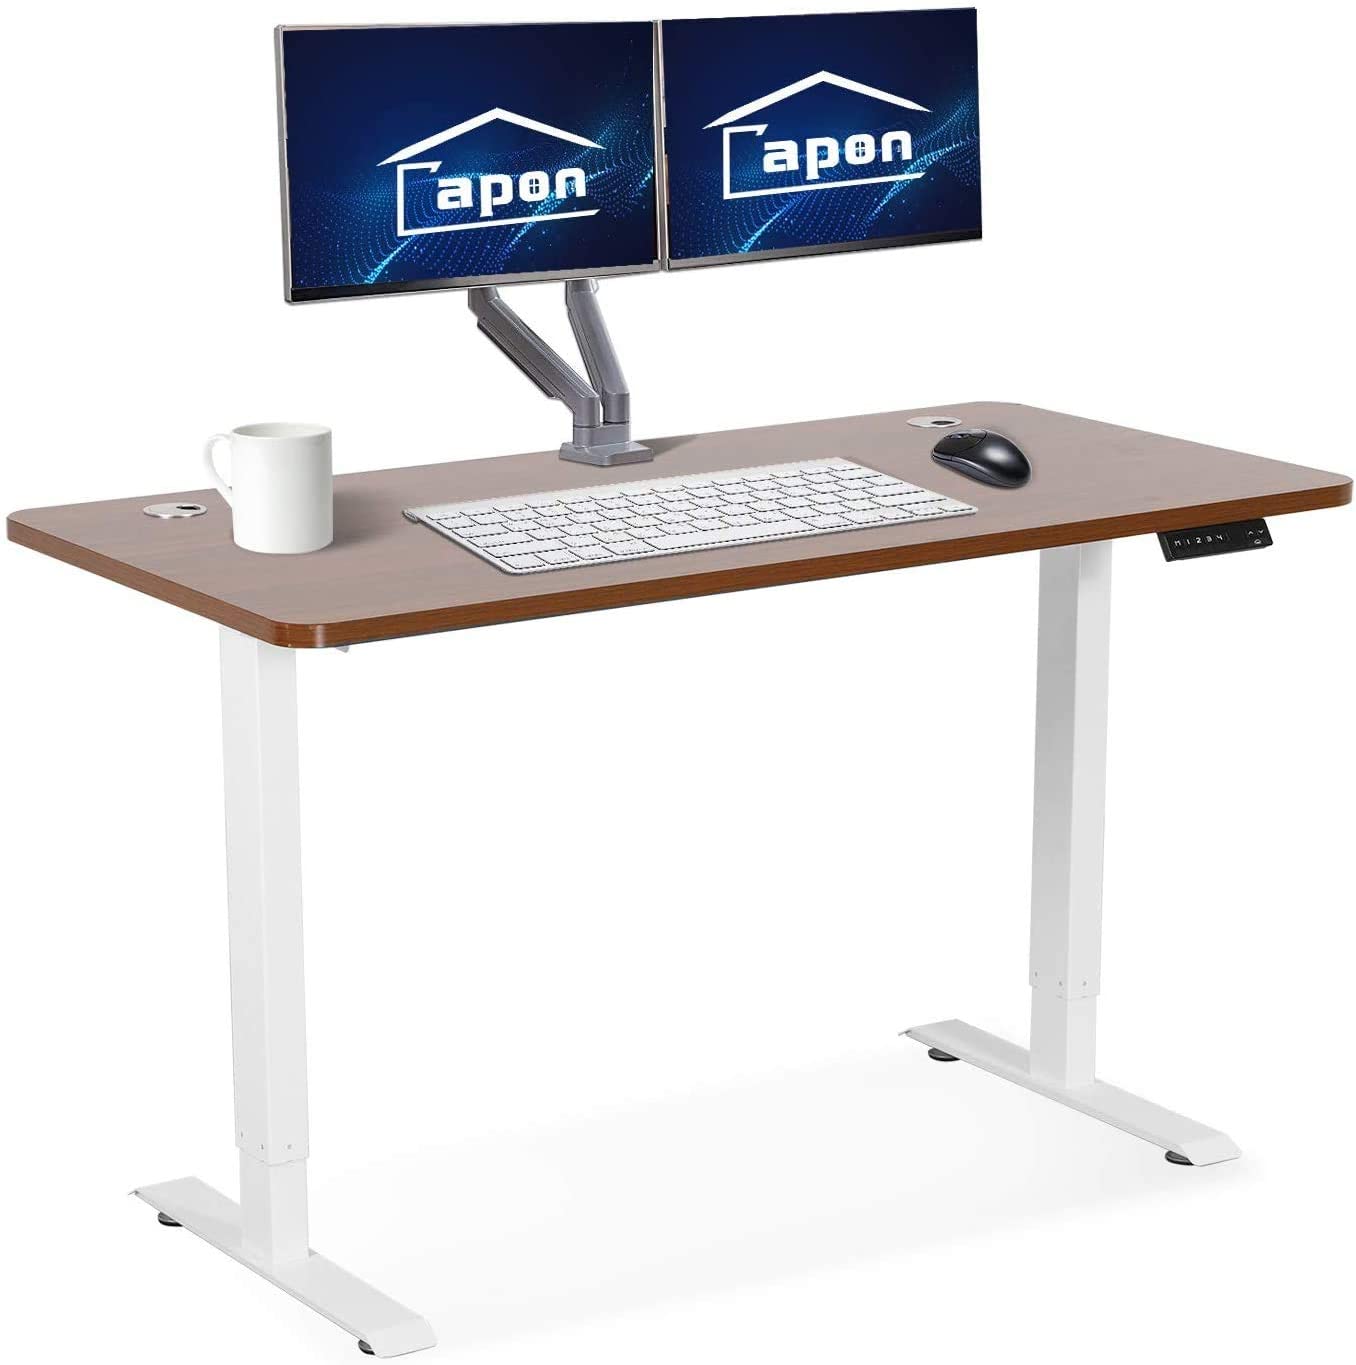 CAPON Dual Motor Electric Adjustable Standing Computer Desk for Home and Office (White Frame only)